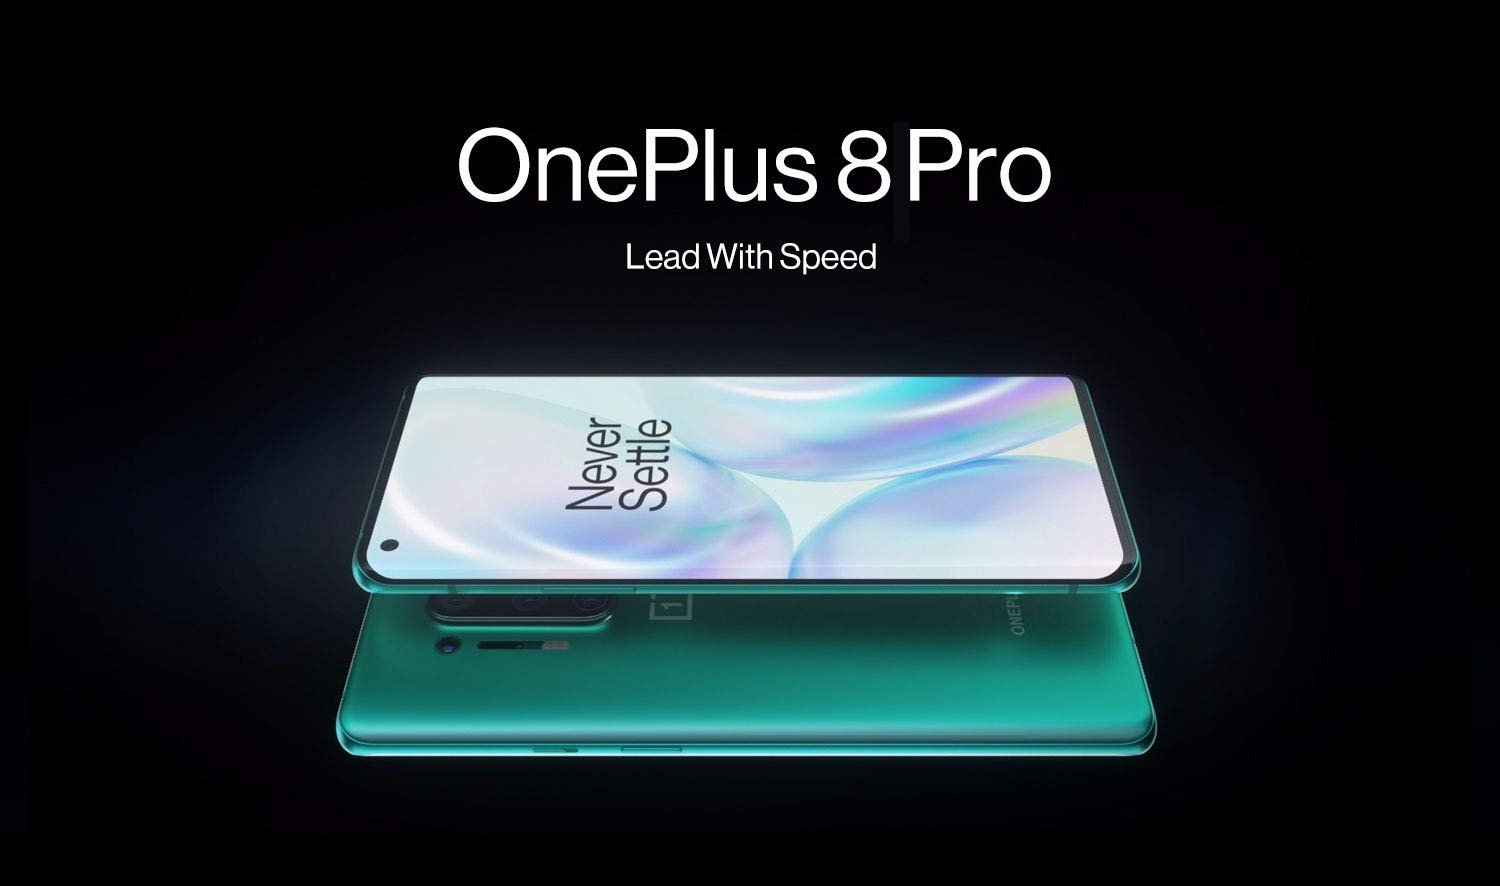 OnePlus 8 Pro Lead With Speed